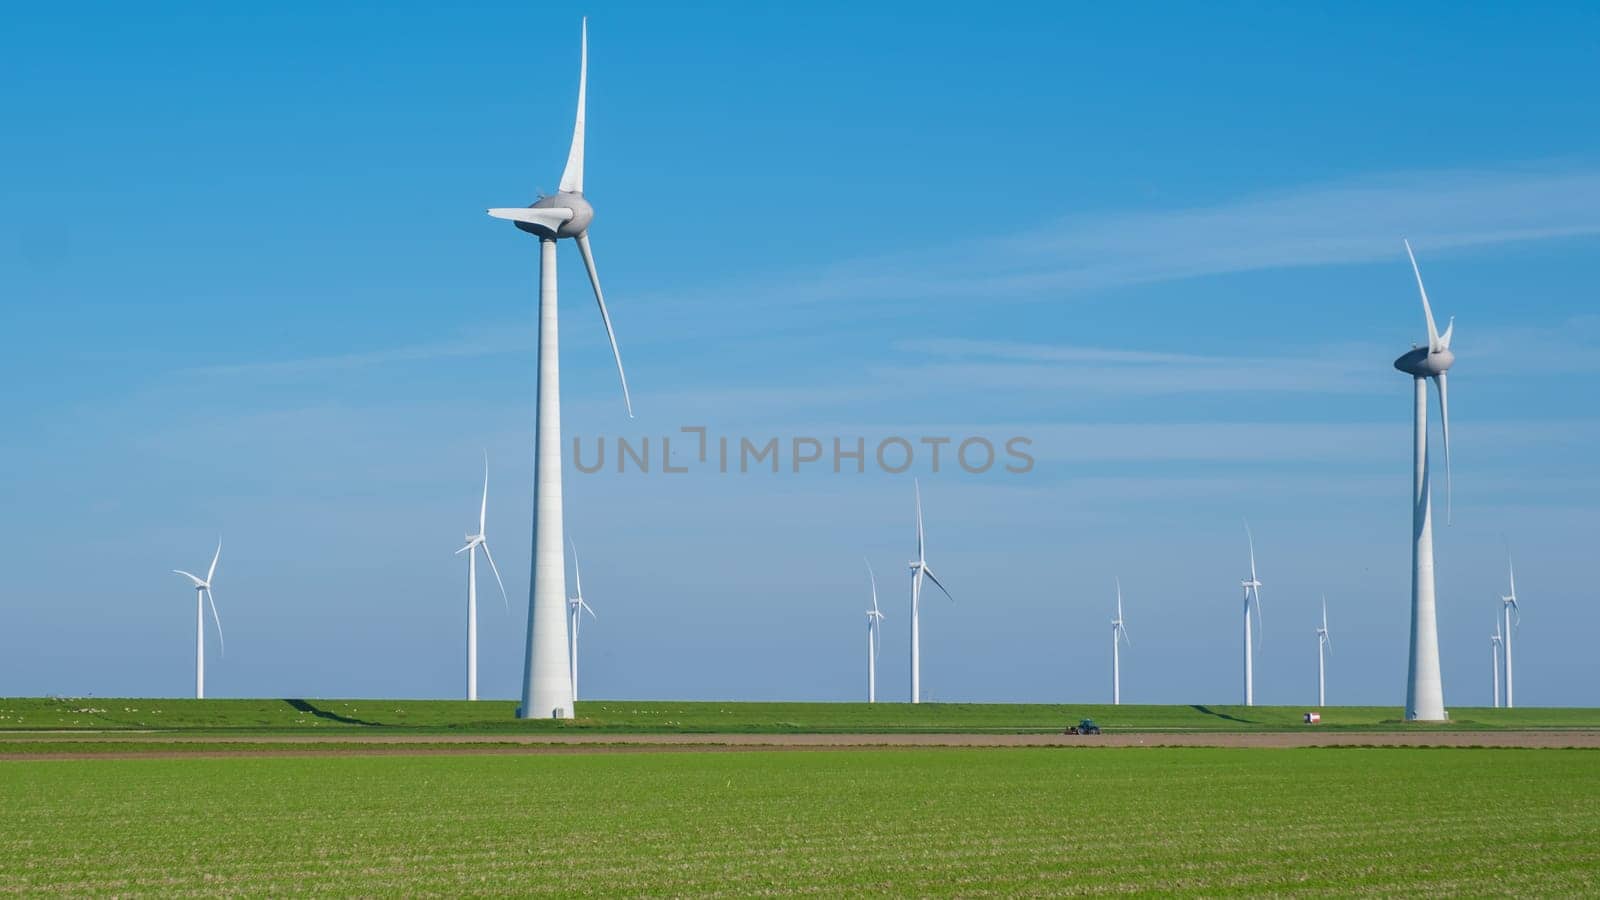 A serene field of vibrant green grass stretches out before us, dotted with a collection of majestic windmills spinning gracefully in the background.